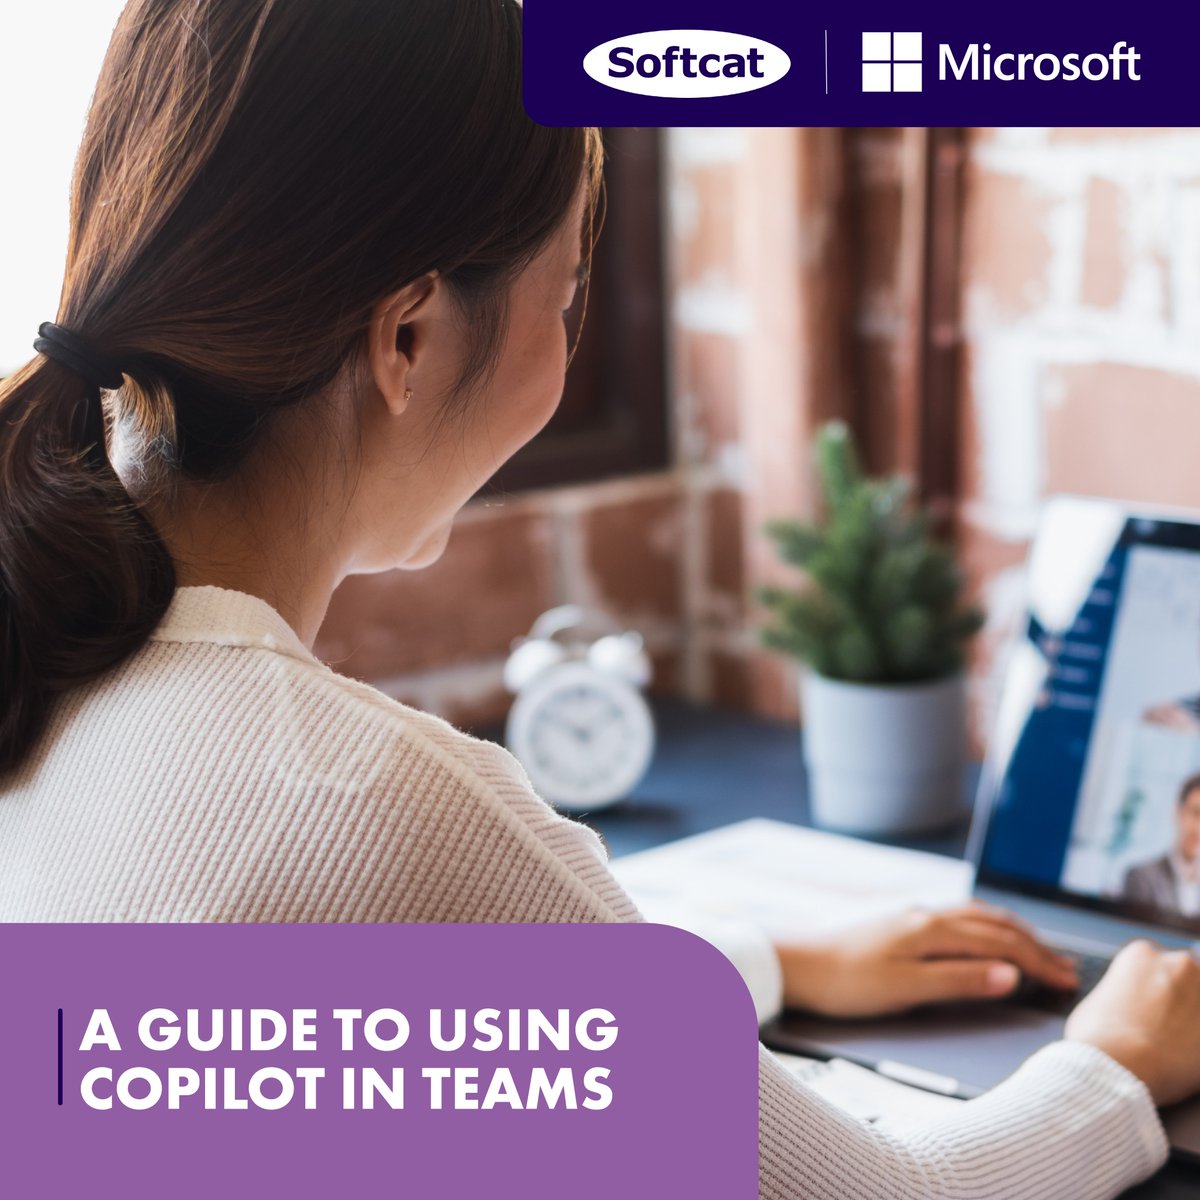 In the third instalment of our ‘How to…’ Copilot series, Bradley Howe, Technologist at Softcat, explores how you can use Copilot in Teams to save time, enhance your communication, and work with your team more efficiently. Read the guide here: softcat.com/blog/how-use-c… #Copilot